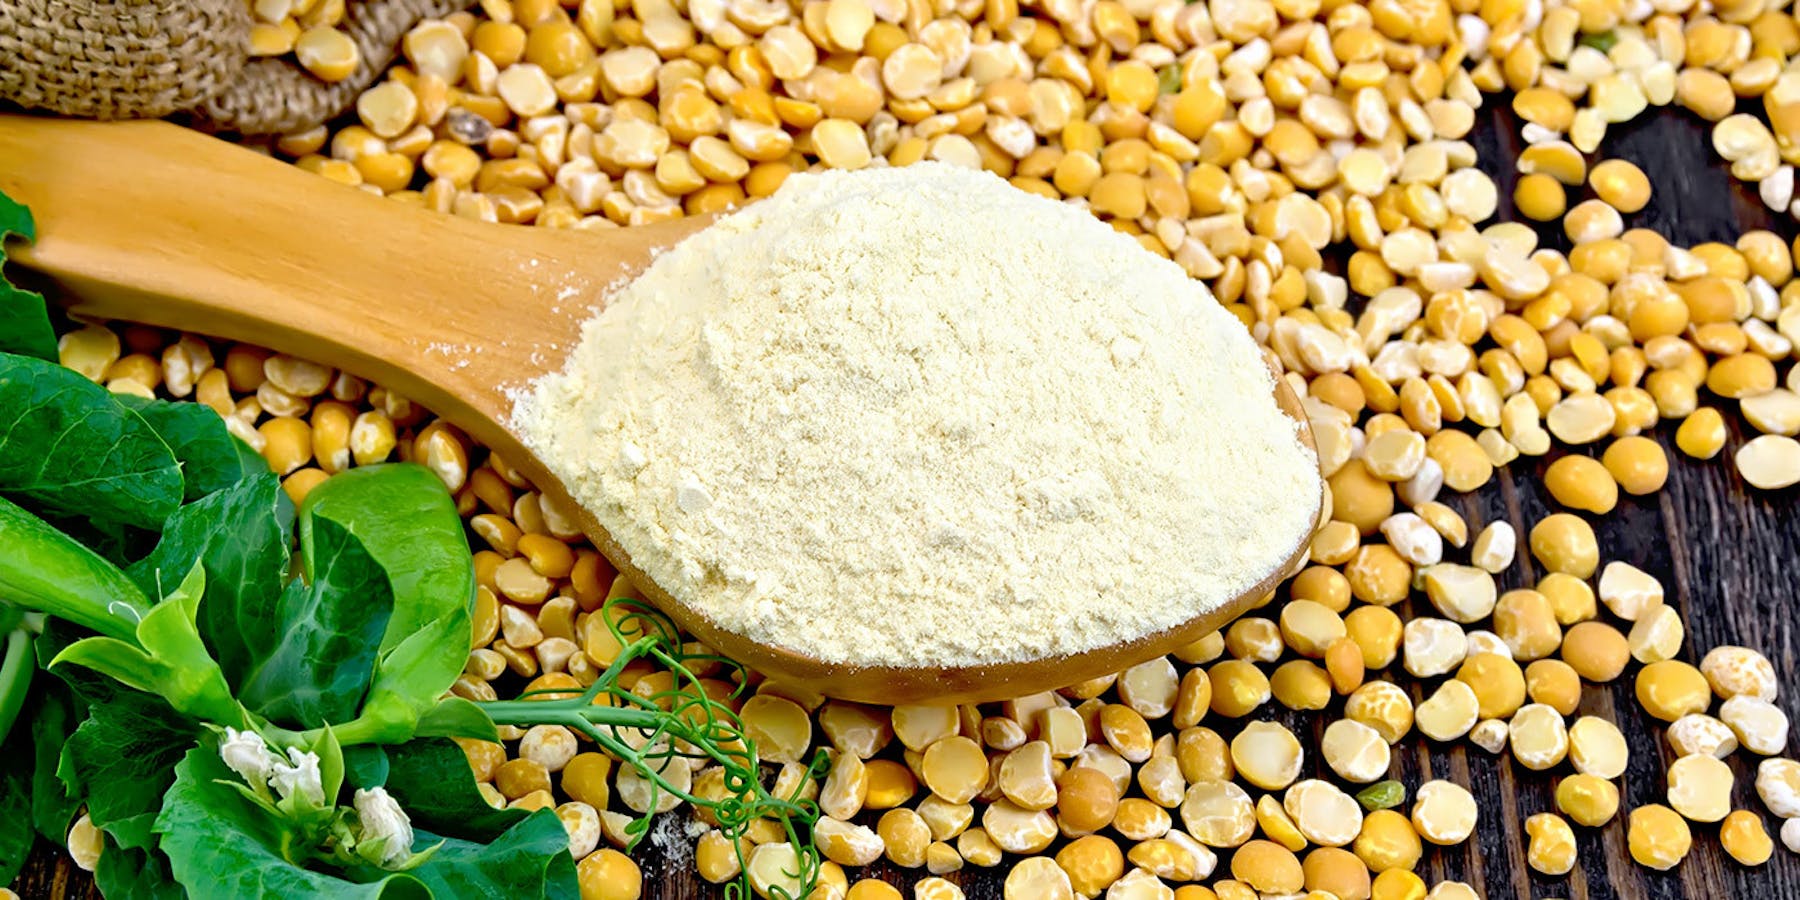 Plant-Based Protein: Health and Environmental Benefits, Plus Tips